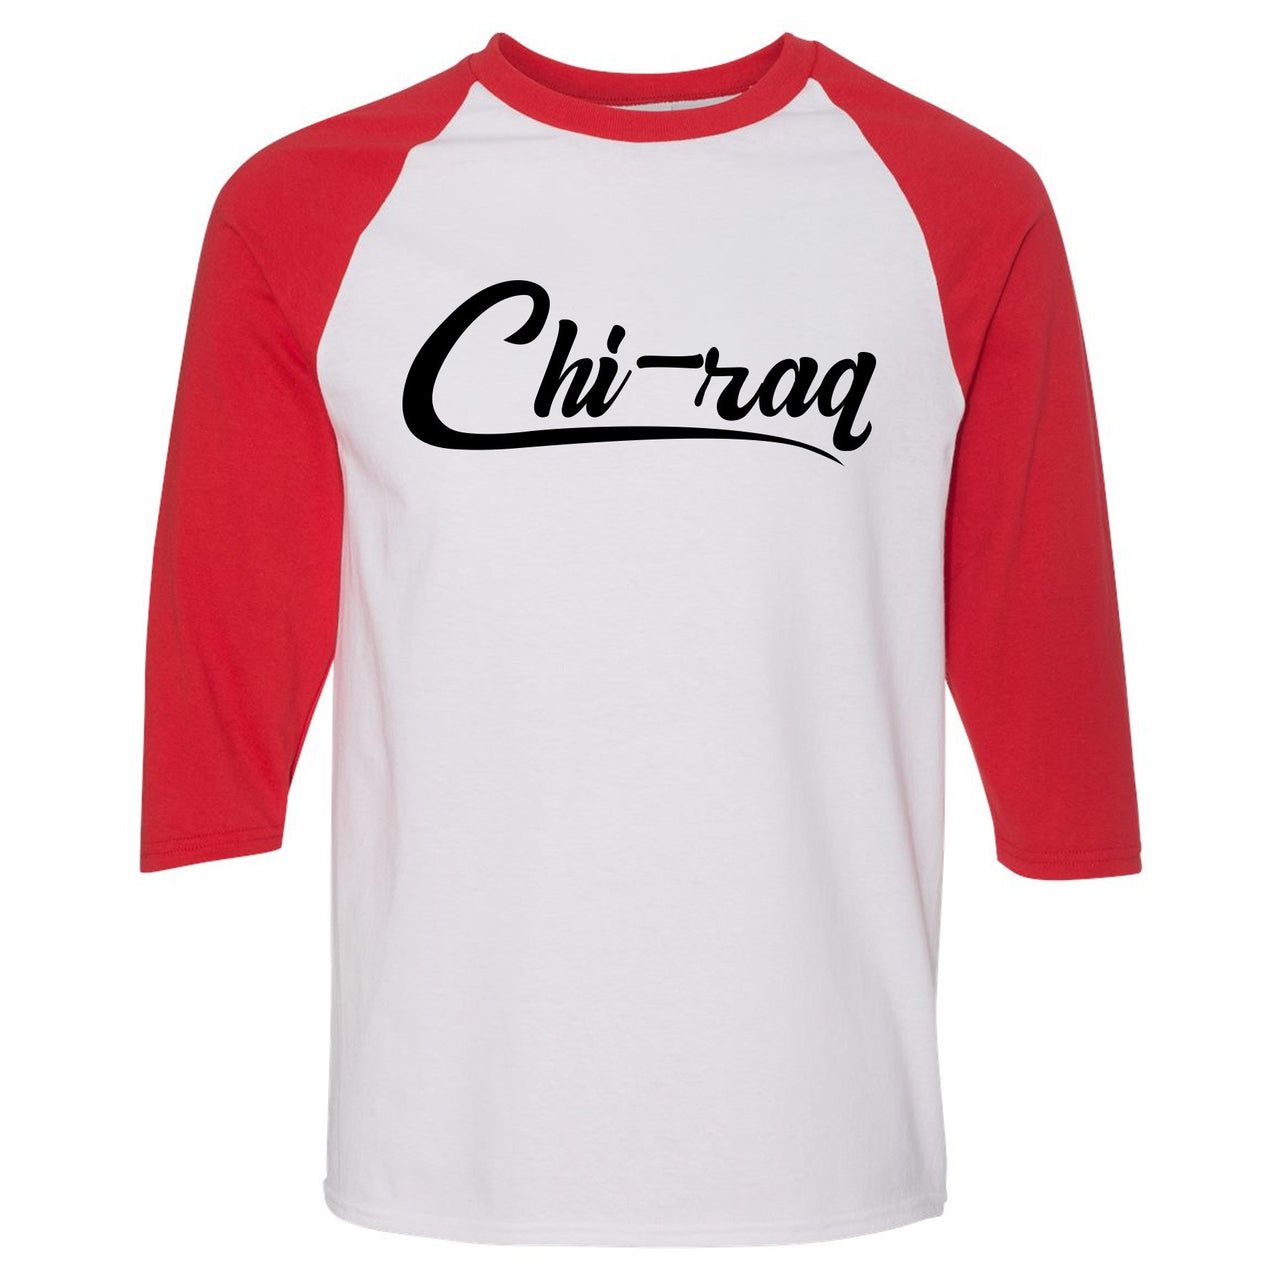 Reflections of a Champion 7s Raglan T Shirt | Chiraq Script, White and Red